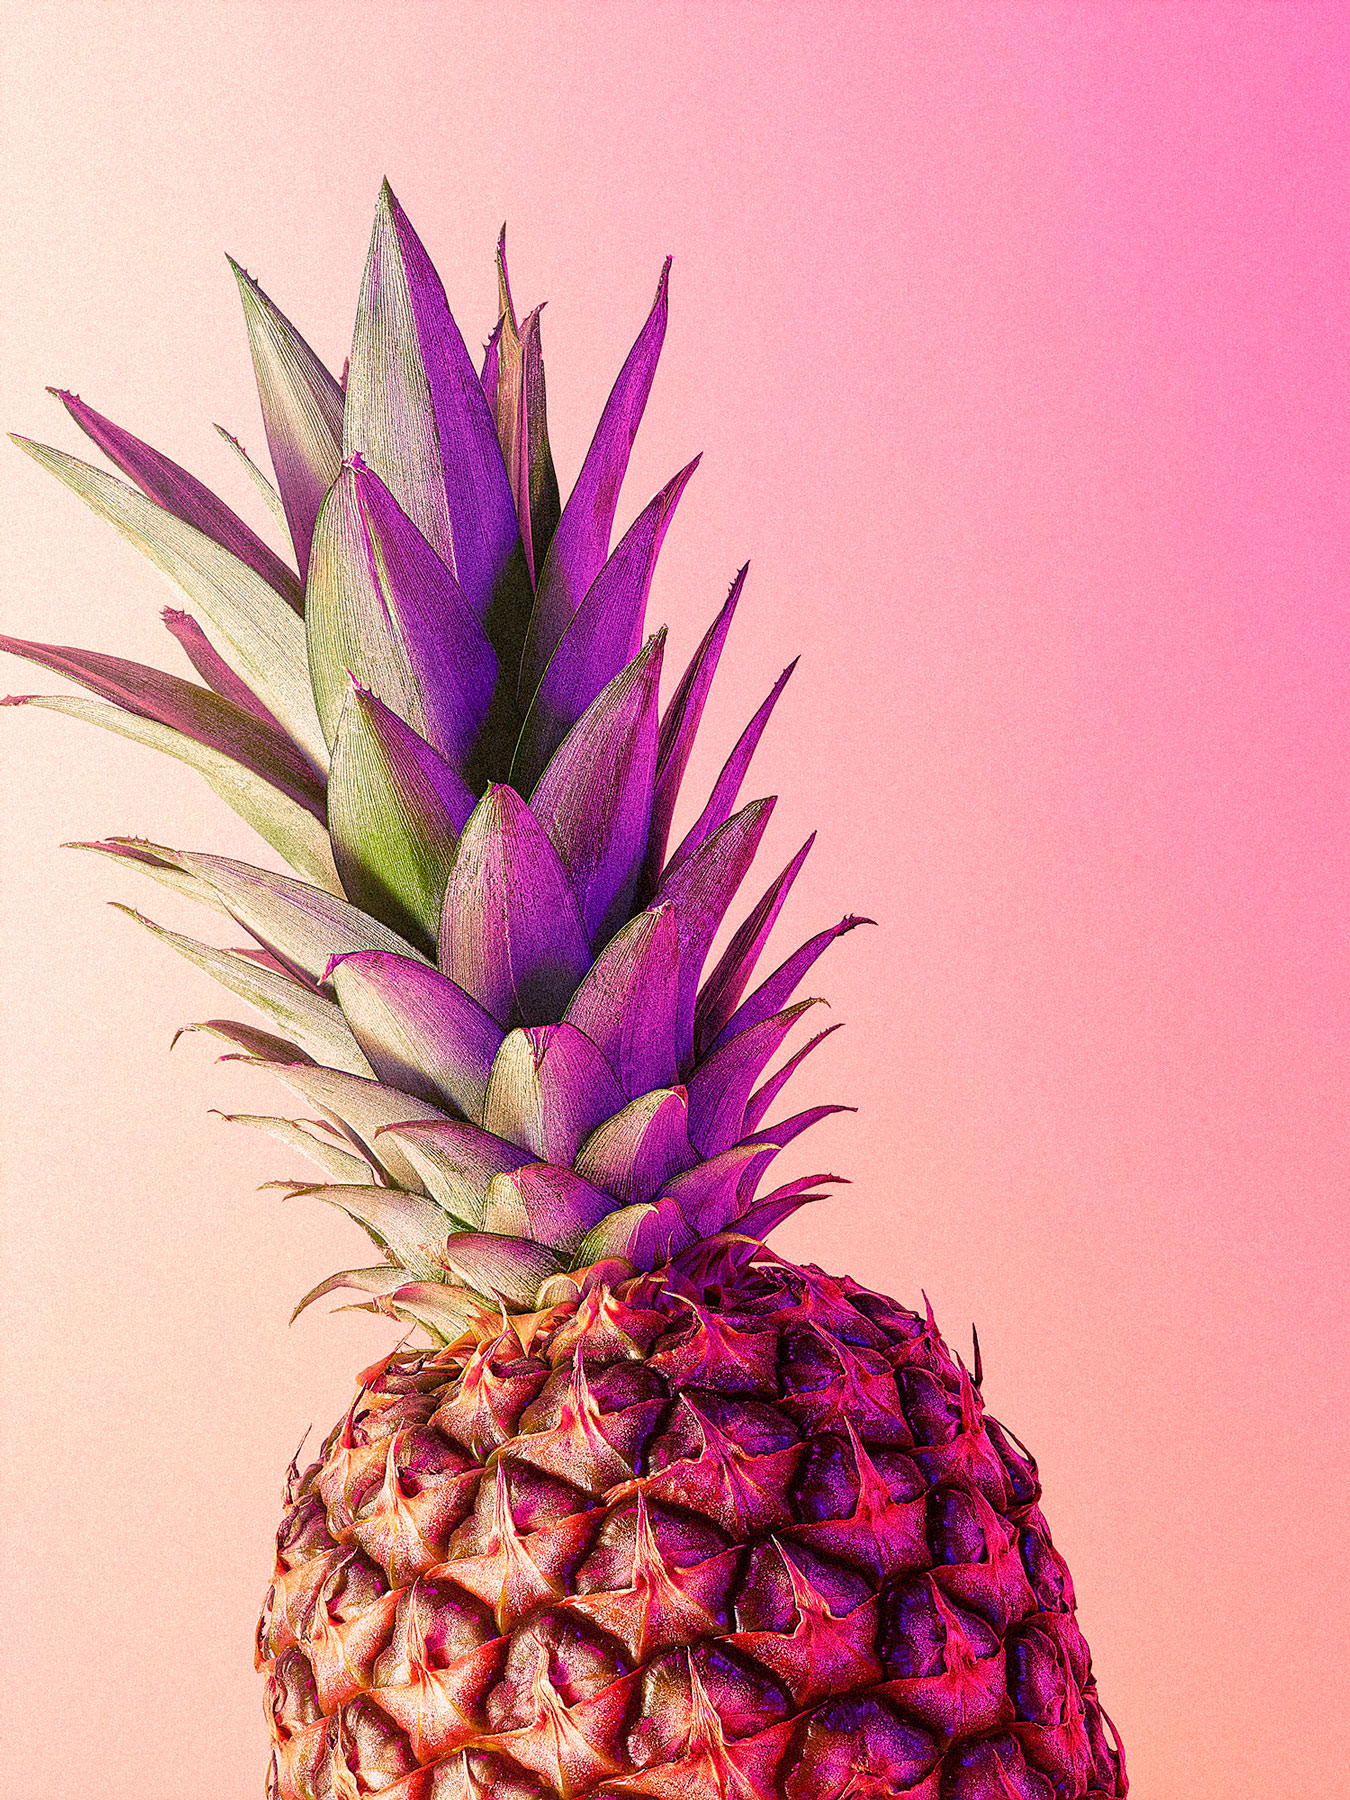 Whole pineapple on a orange and pink hued background - London Food & Drinks Photographer